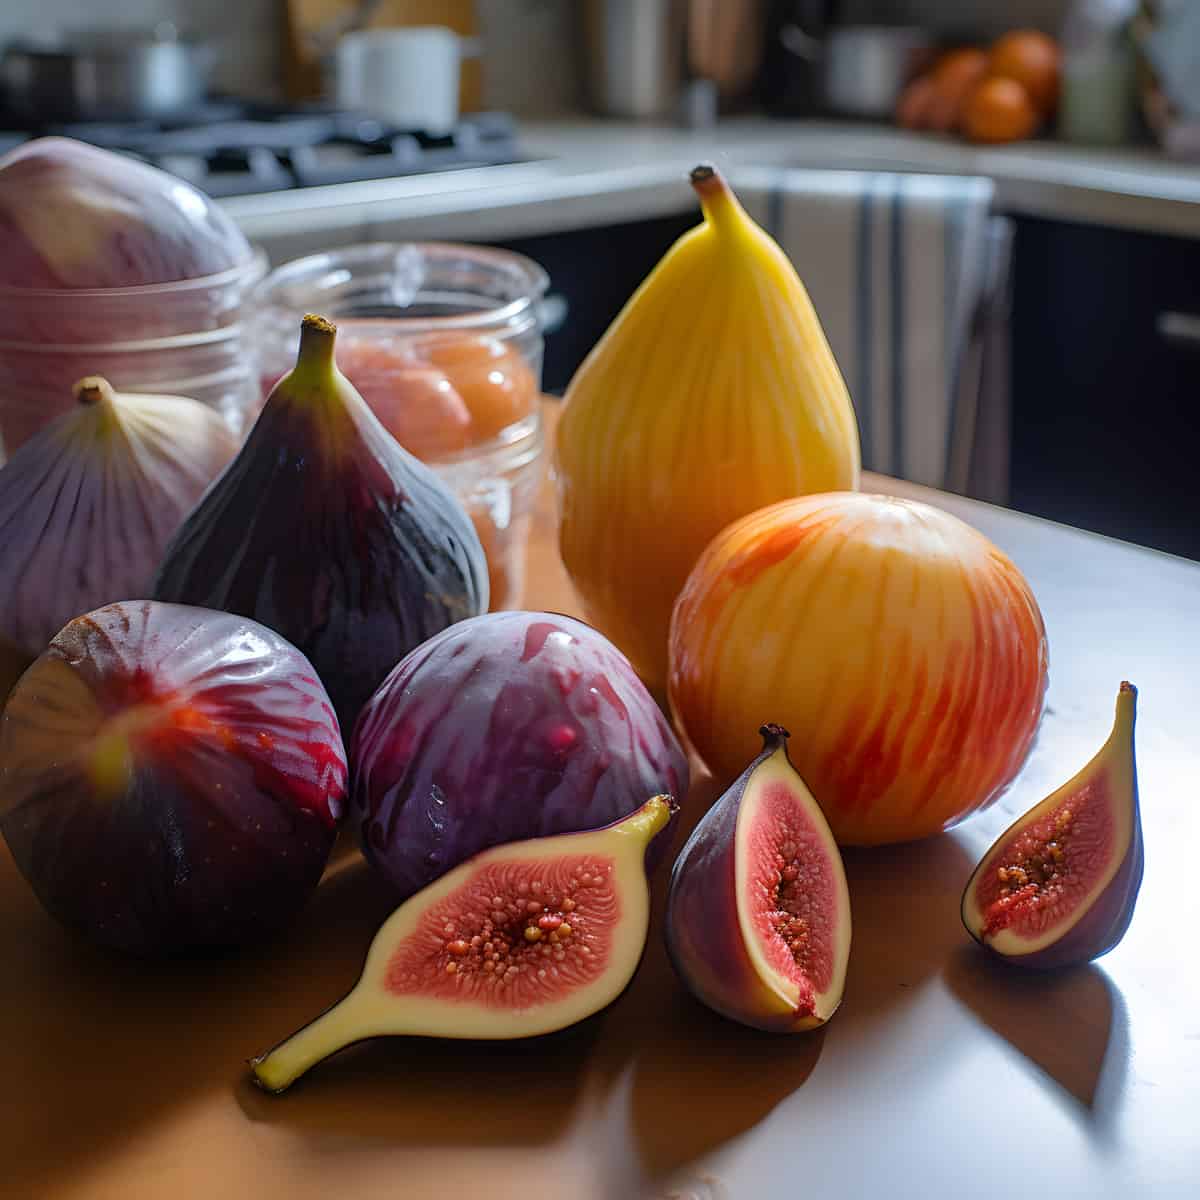 Dye Fig Fruit on a kitchen counter